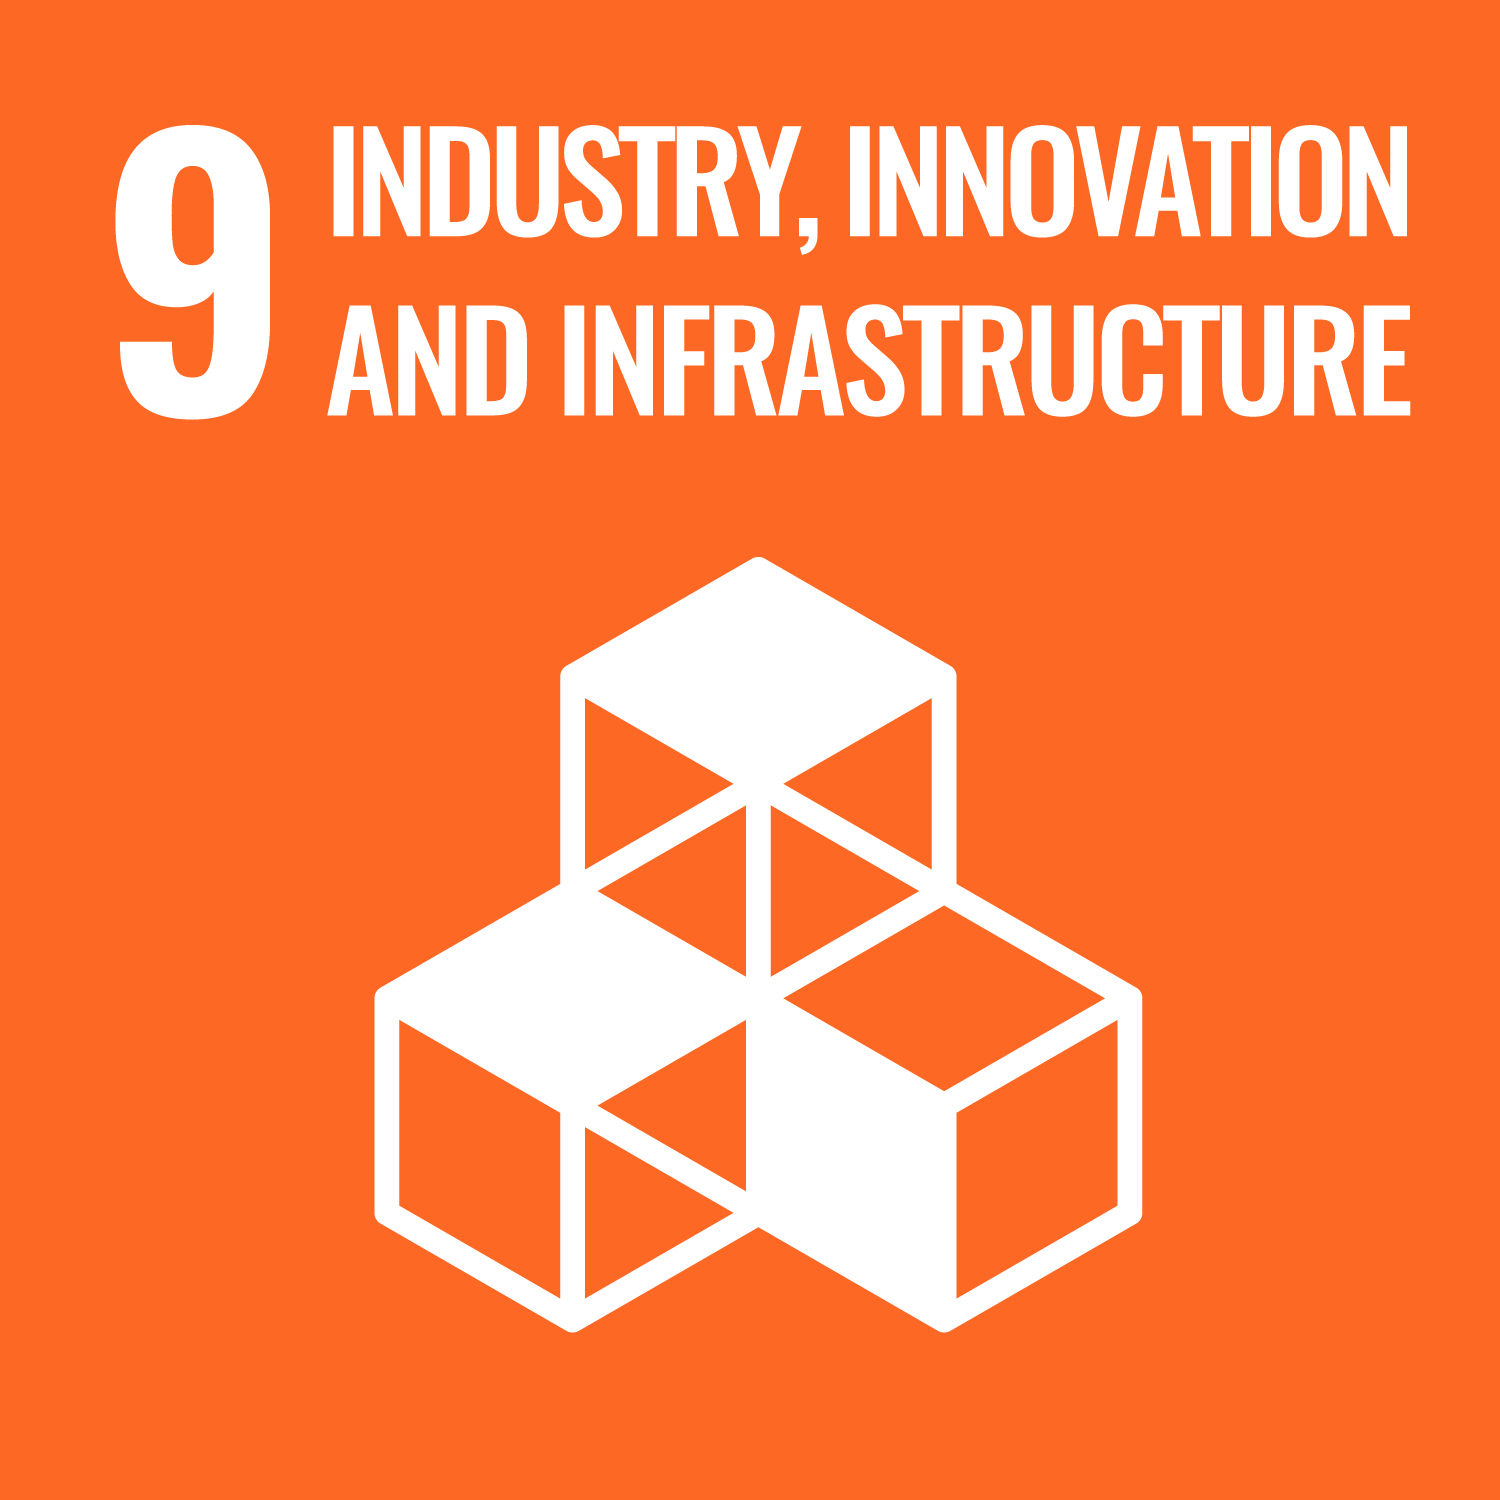 SDG 9: Industry innovation and infrastructure